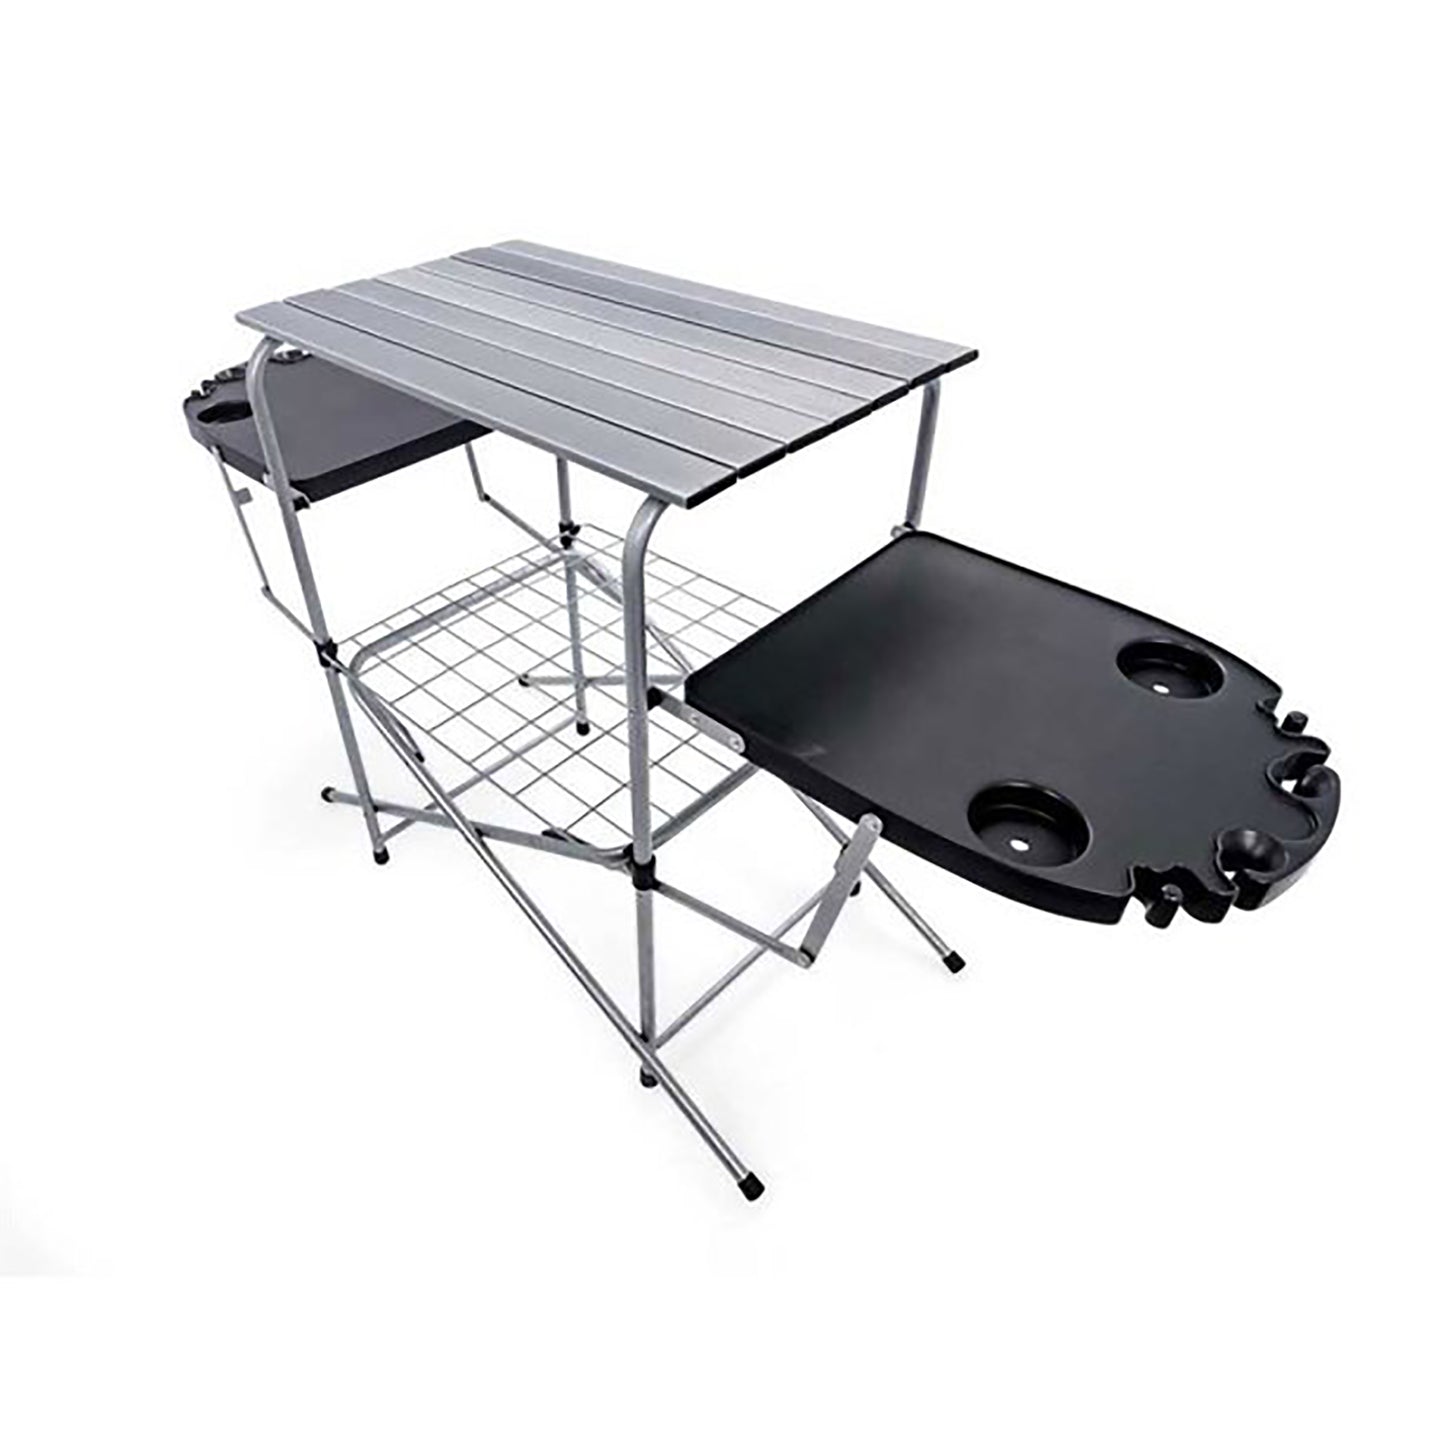 Camco Deluxe Grilling Table with Plastic Side Tables